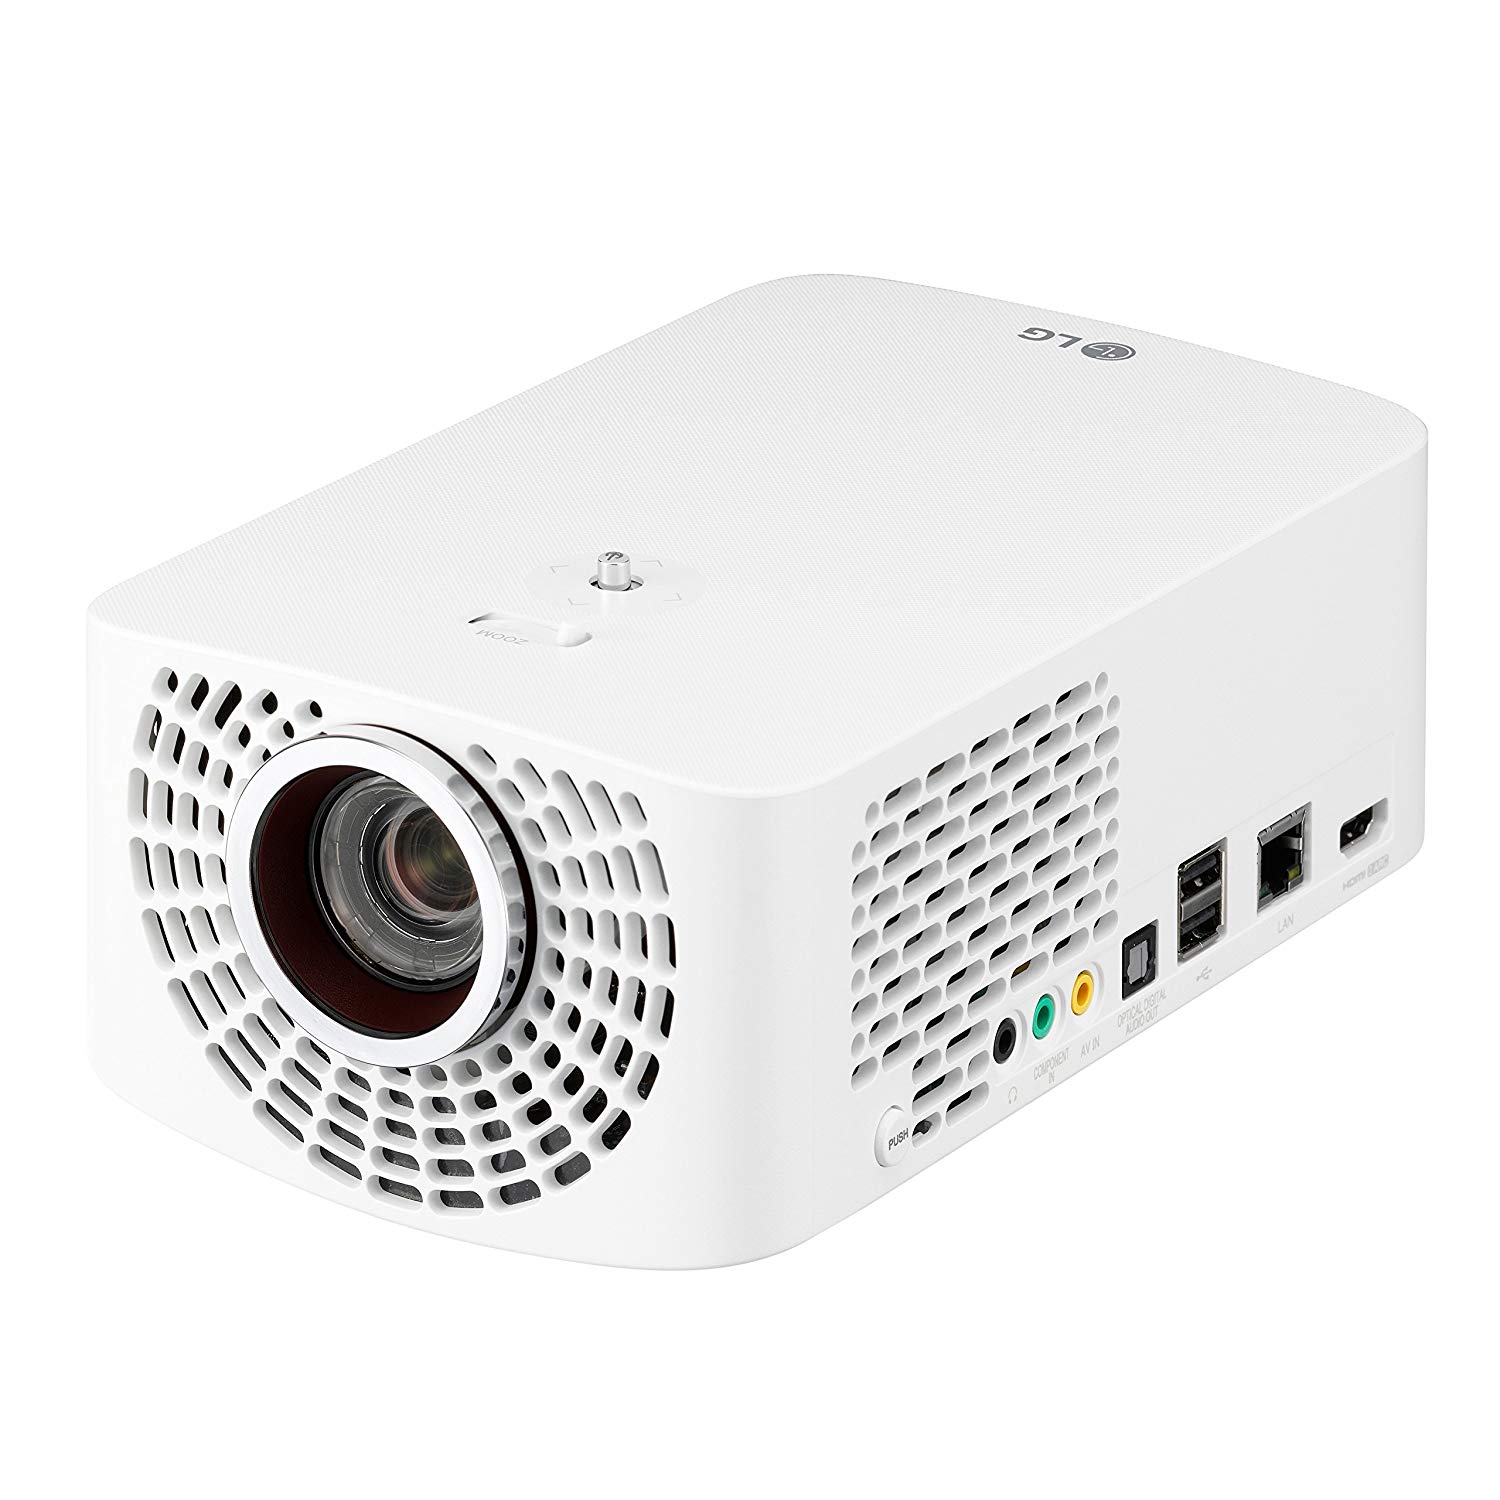  LG PF1500W LED Smart Home Theater Projector